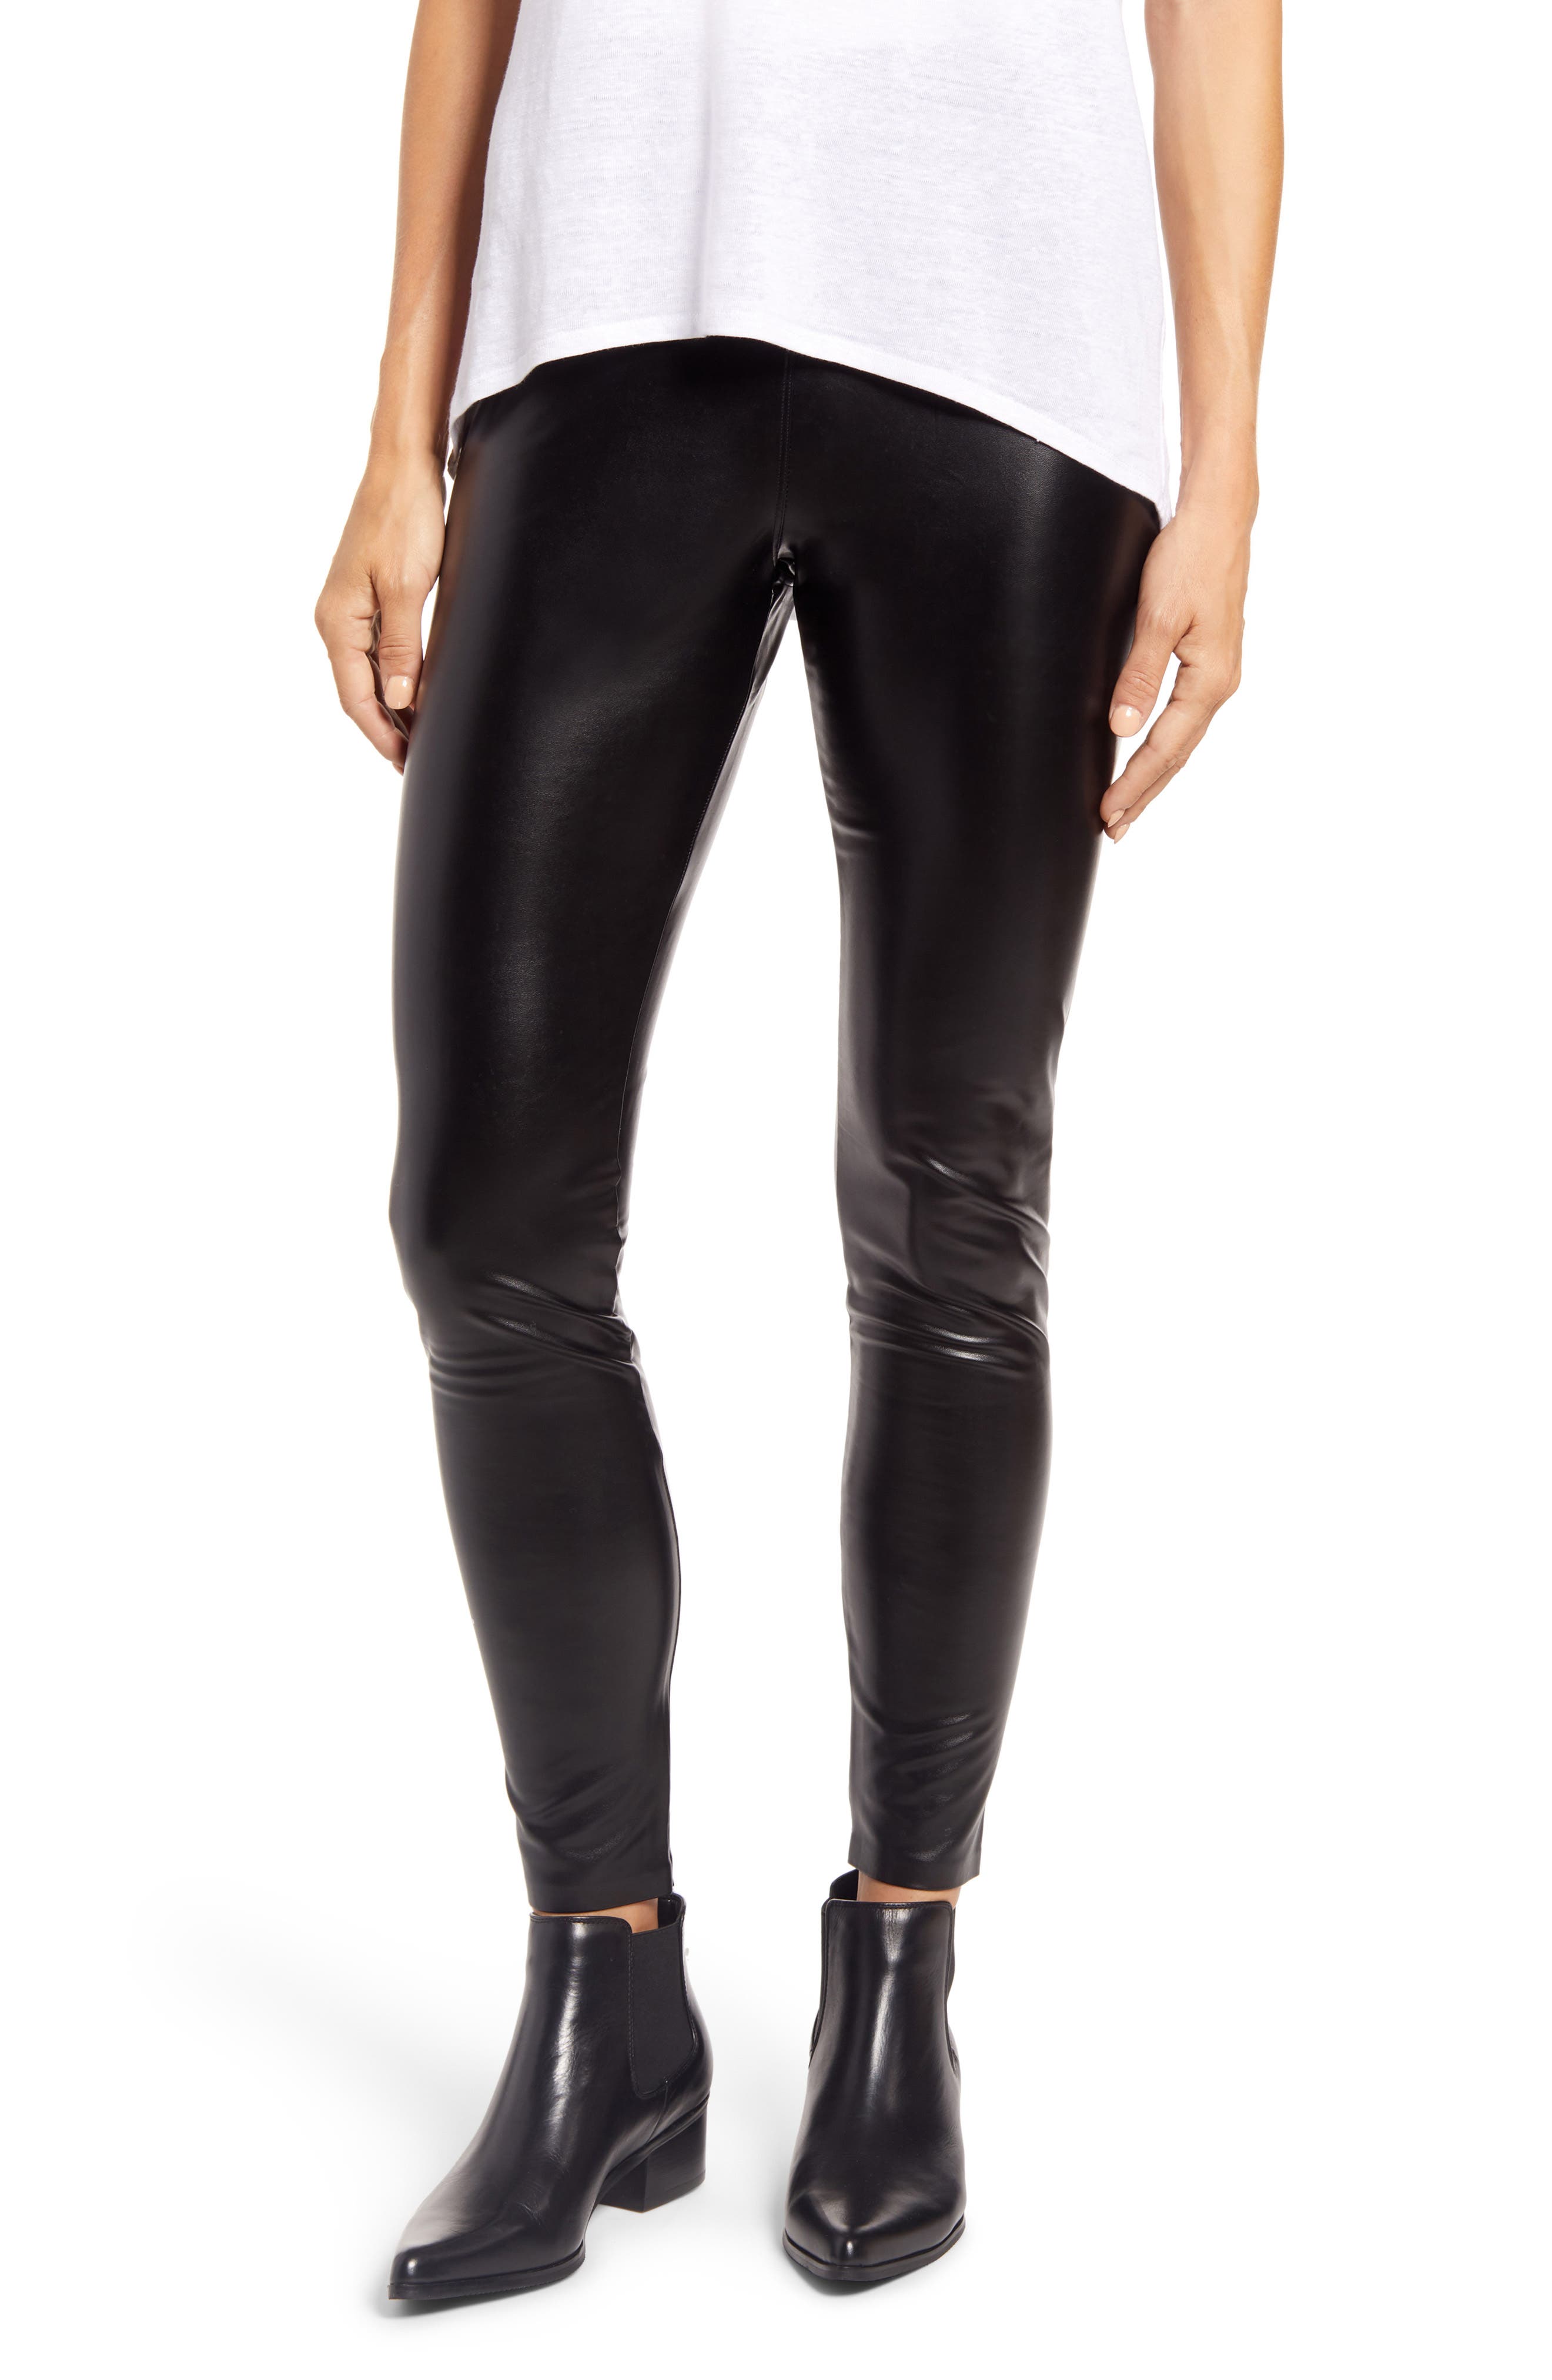 black faux leather jeans womens